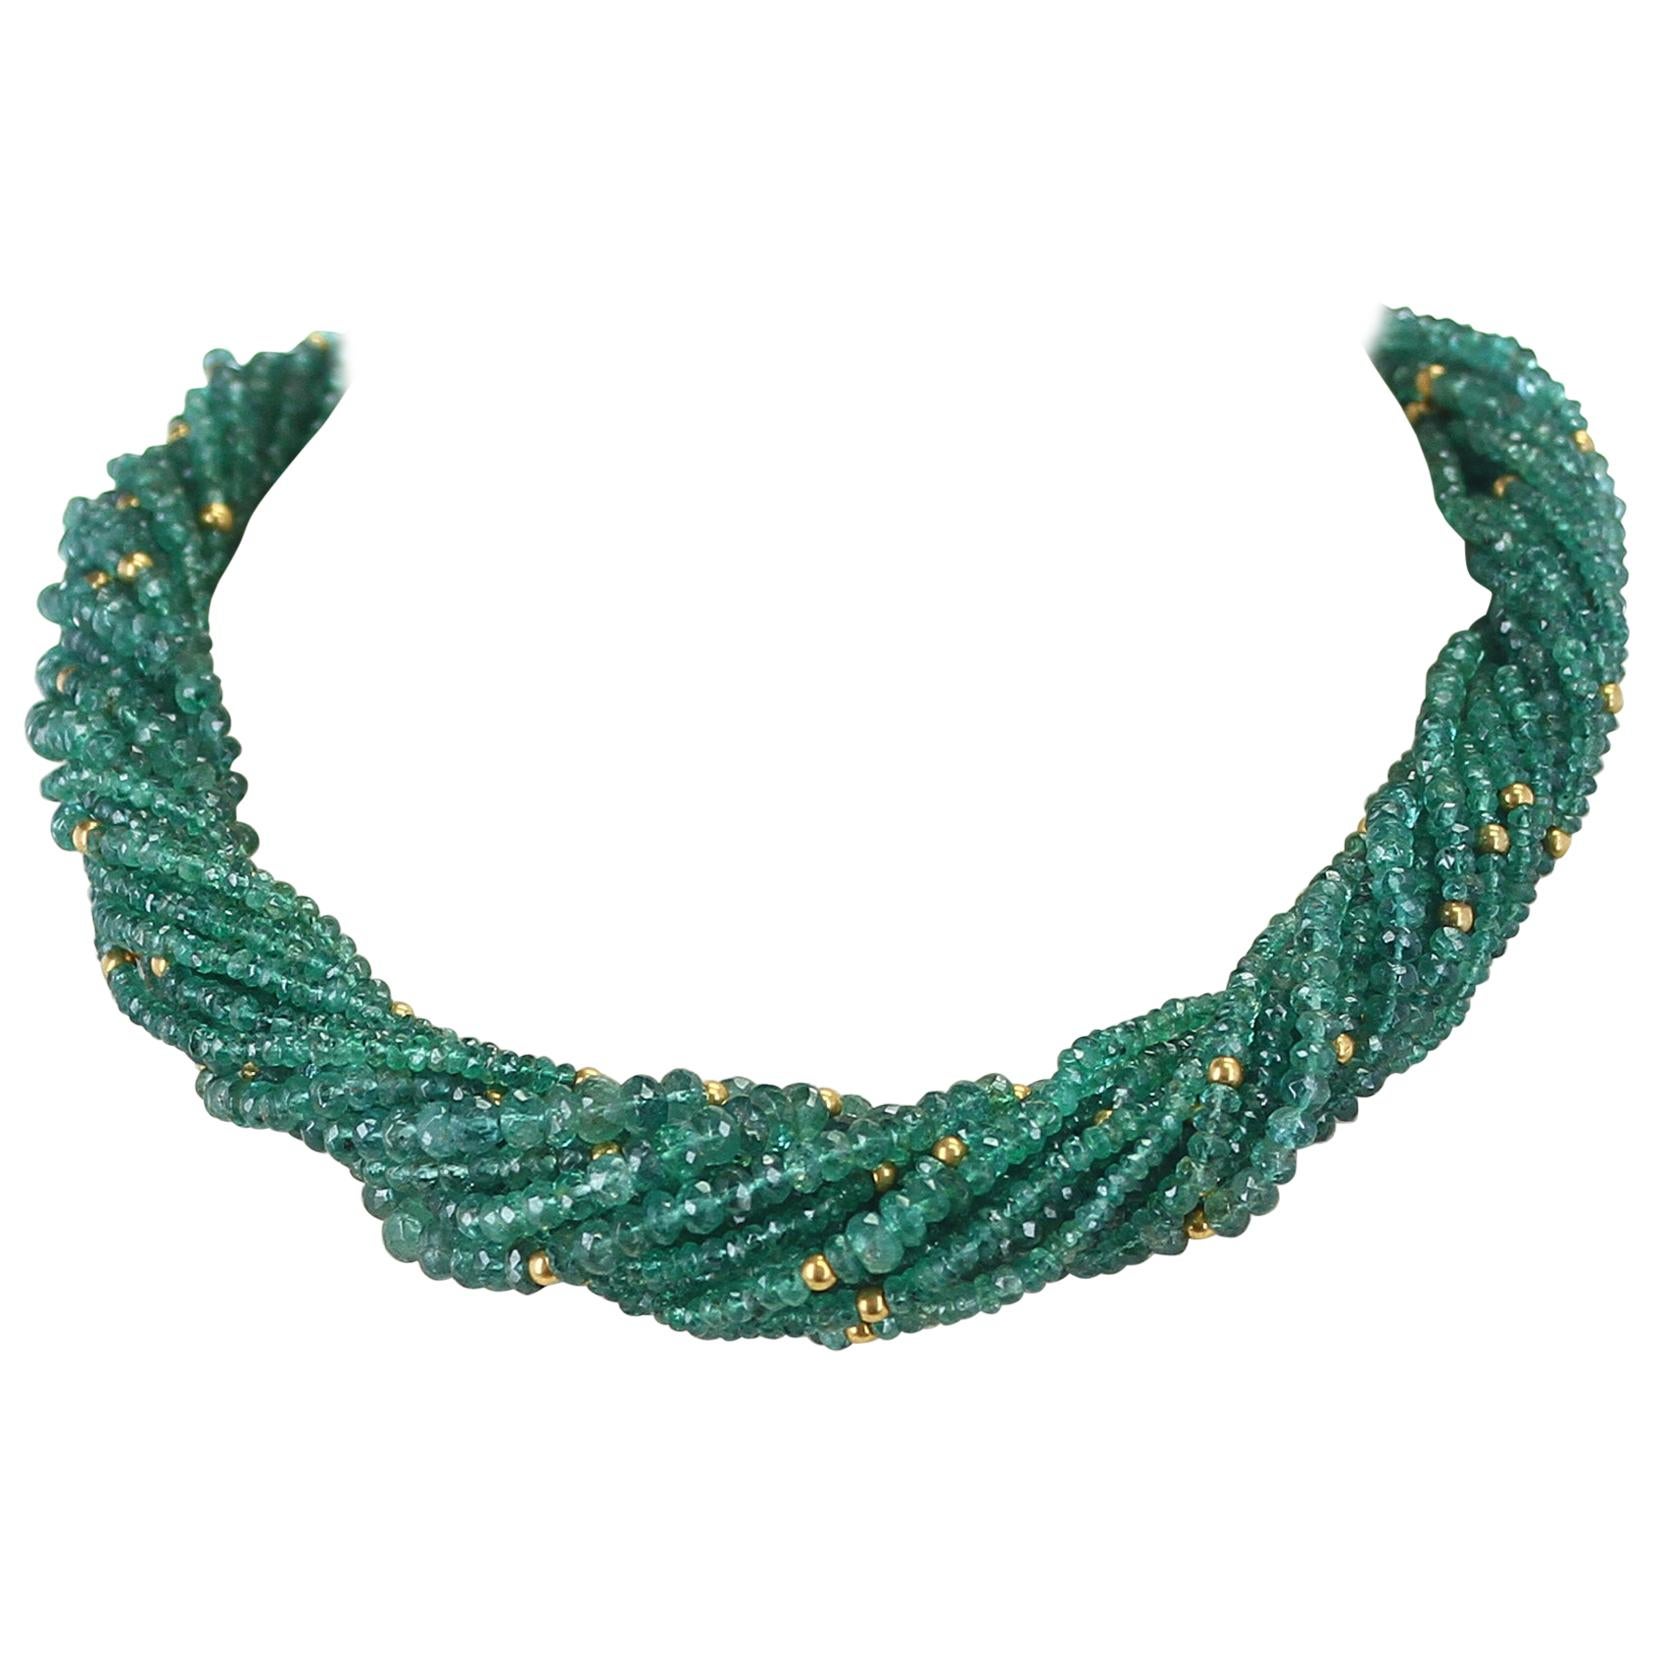 540 Carat Genuine and Natural Emerald Faceted with Gold Beads Choker Necklace